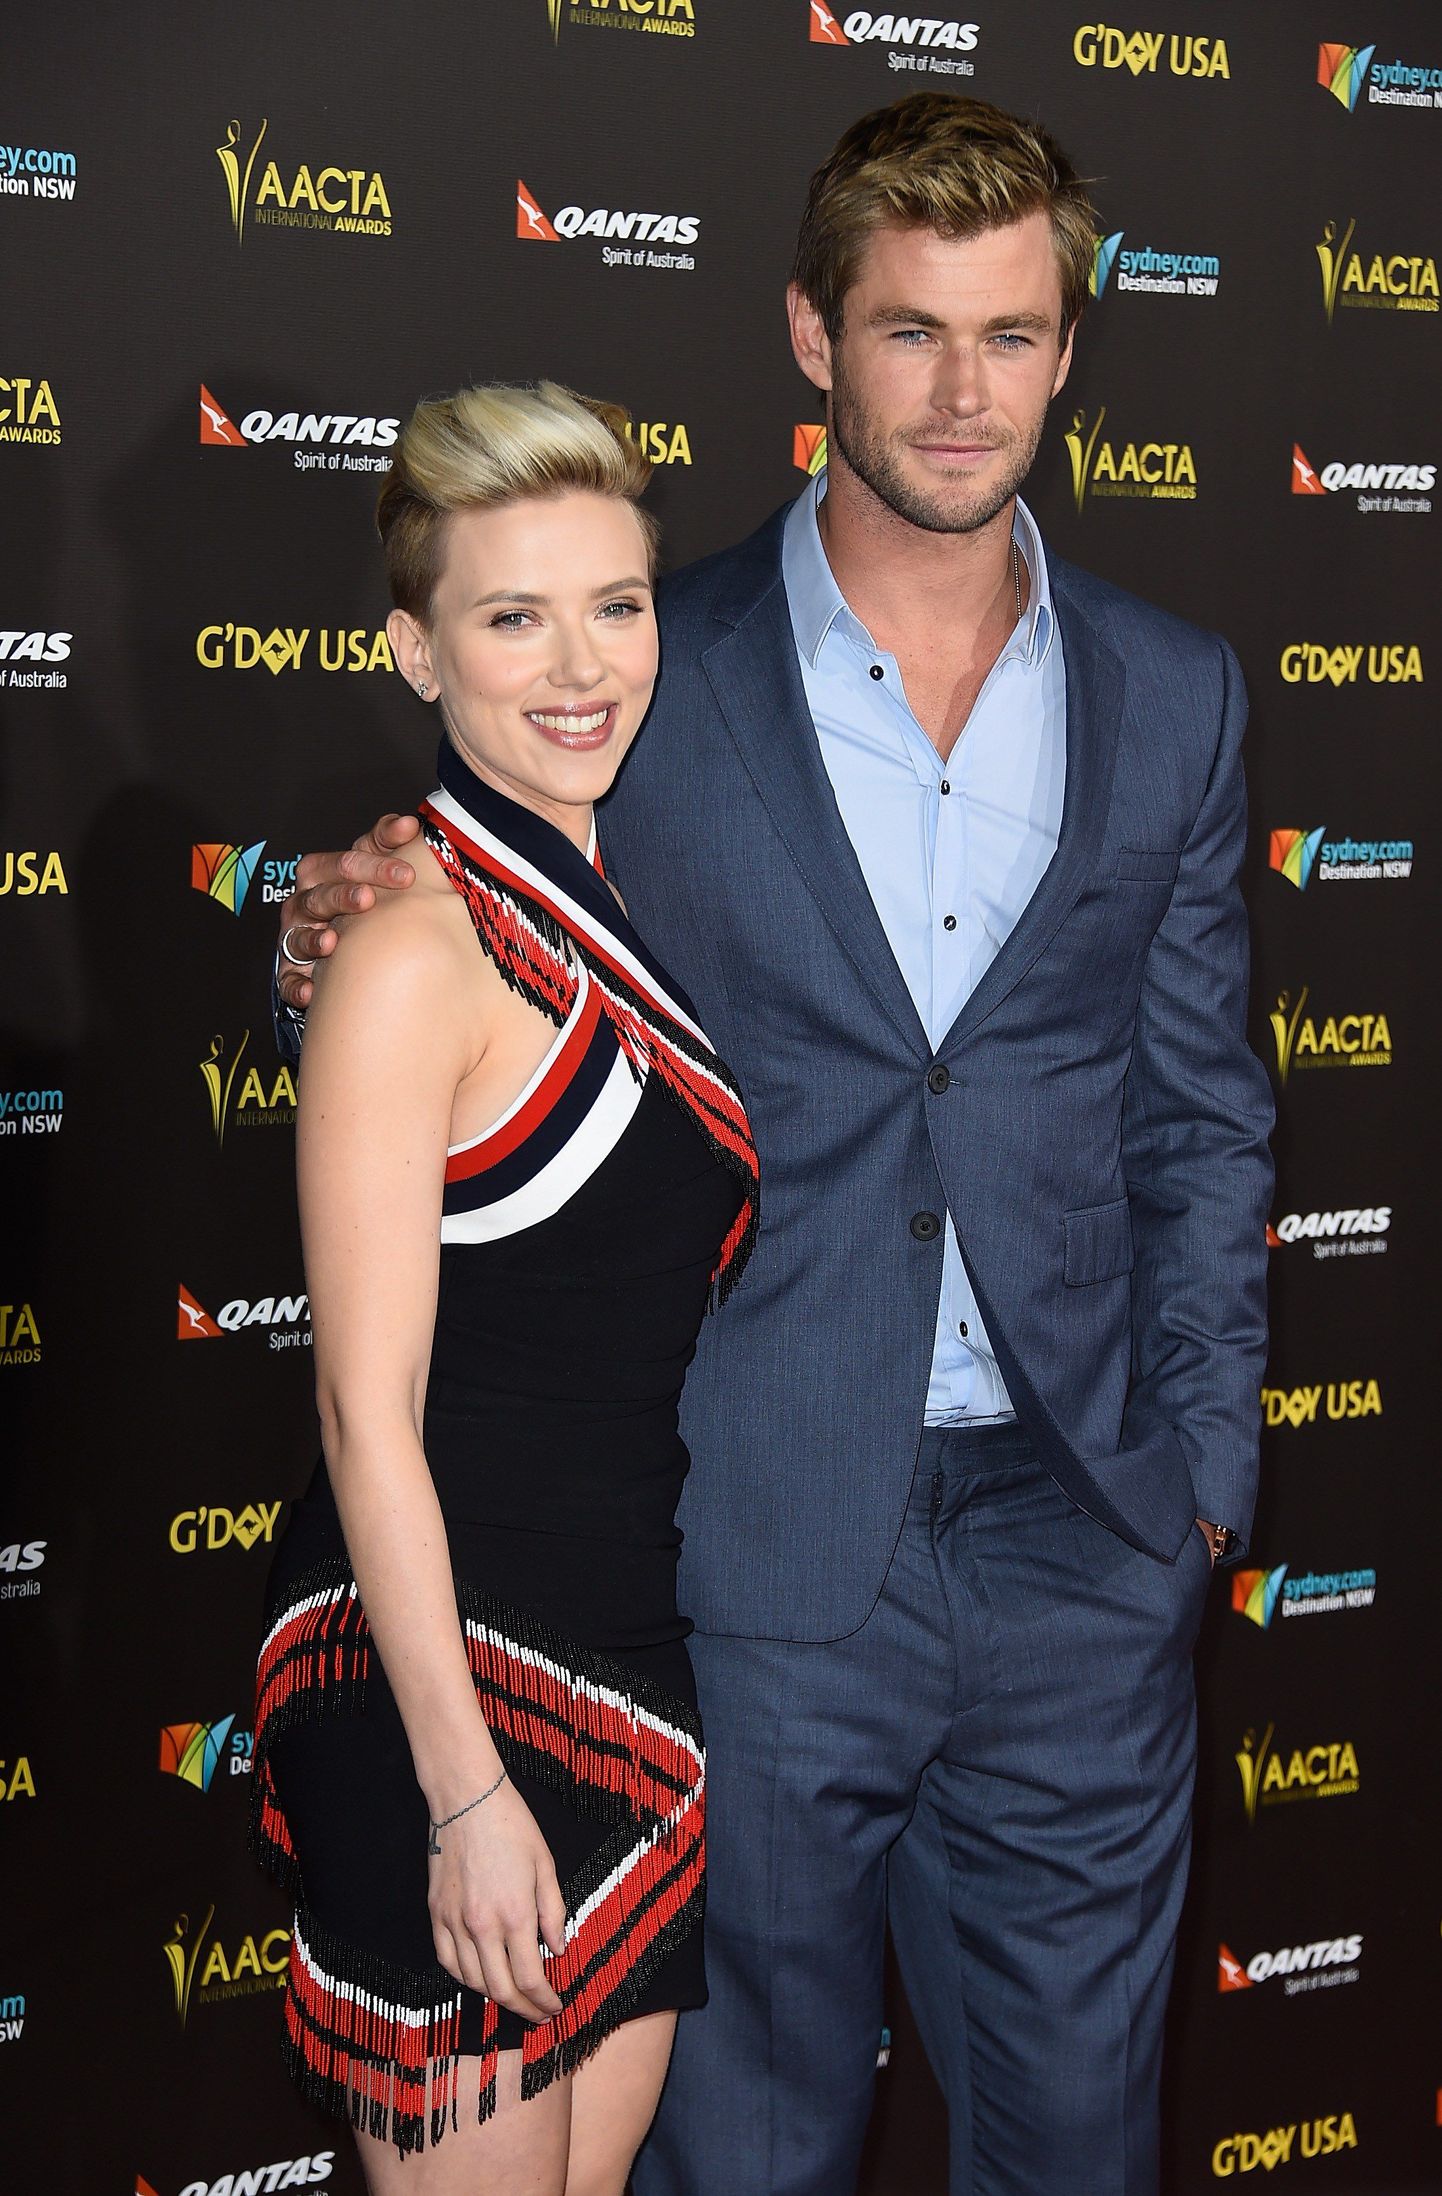 LOS ANGELES, CA - JANUARY 31: Actress Scarlett Johansson and actor Chris Hemsworth arrives at the 2015 G'Day USA Gala Featuring The AACTA International Awards Presented By QANTAS at the Hollywood Palladium on January 31, 2015 in Los Angeles, California.   Frazer Harrison/Getty Images/AFP
== FOR NEWSPAPERS, INTERNET, TELCOS & TELEVISION USE ONLY ==